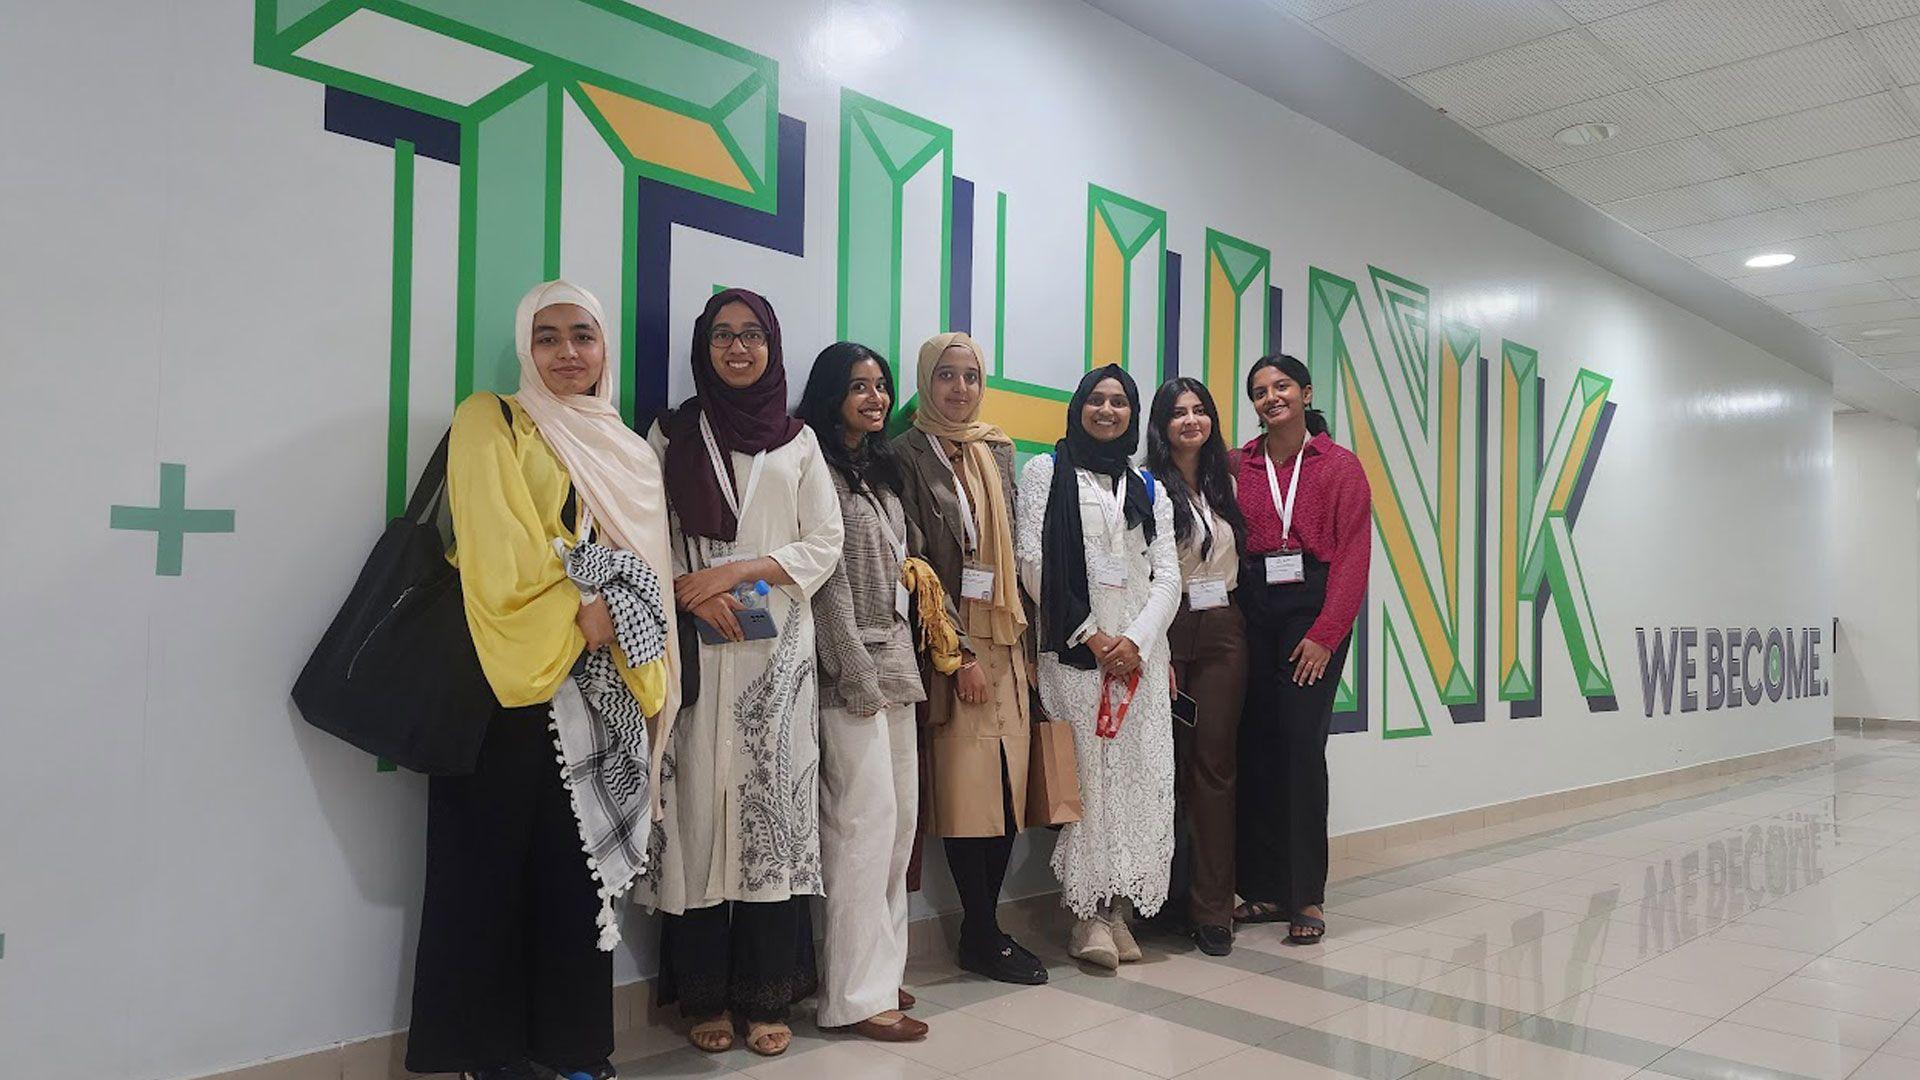 The Office of Student Research (OSR) is delighted to announce the outstanding achievement by MDX Dubai Education and Psychology students at the Abu Dhabi University Undergraduate Research and Innovation Competition. 